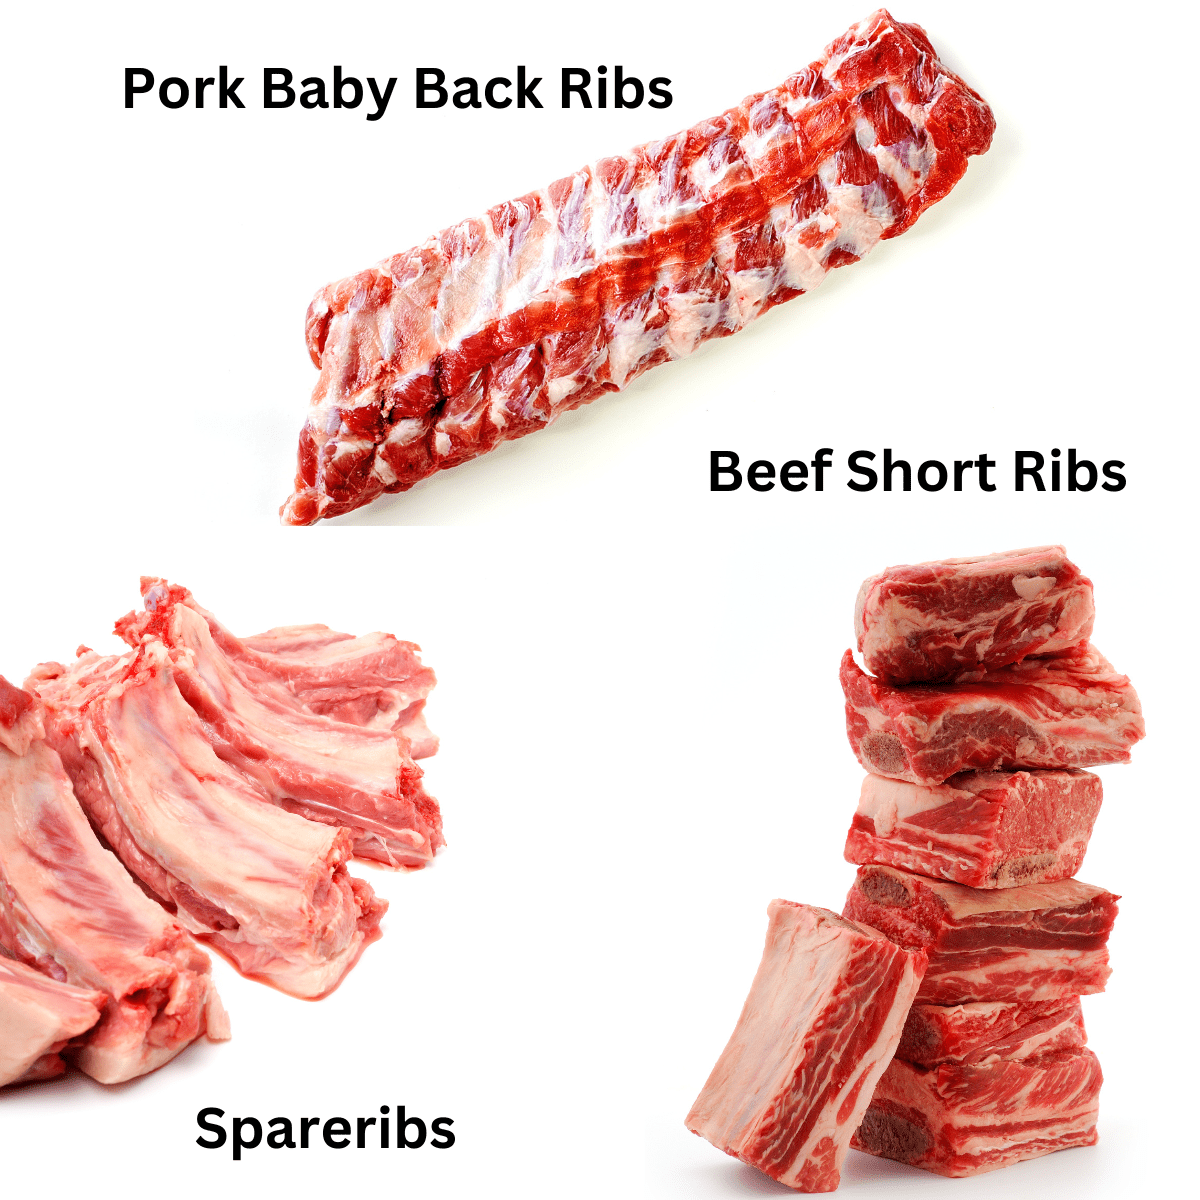 6 Different Types of Ribs - Beef & Pork with 3 pictured and labels.